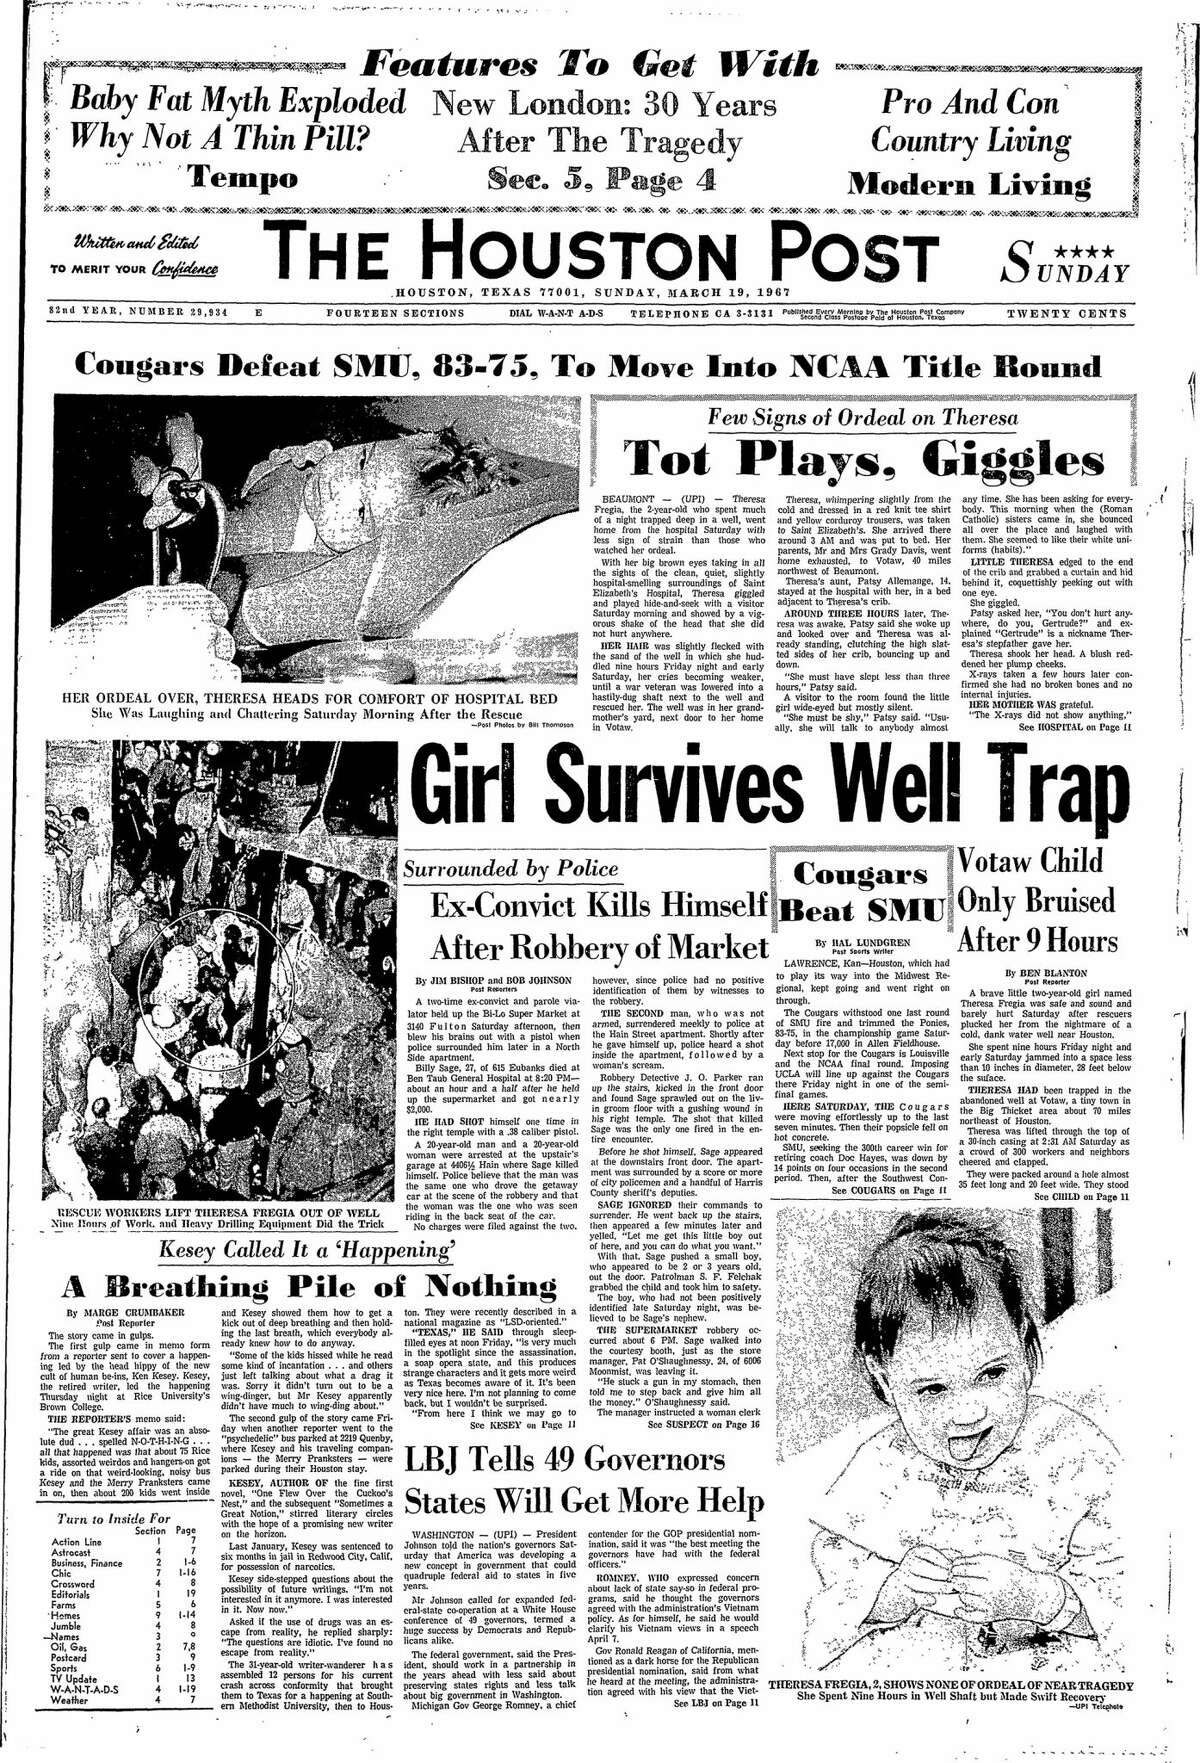 Houston Post front page for March 19, 1967.